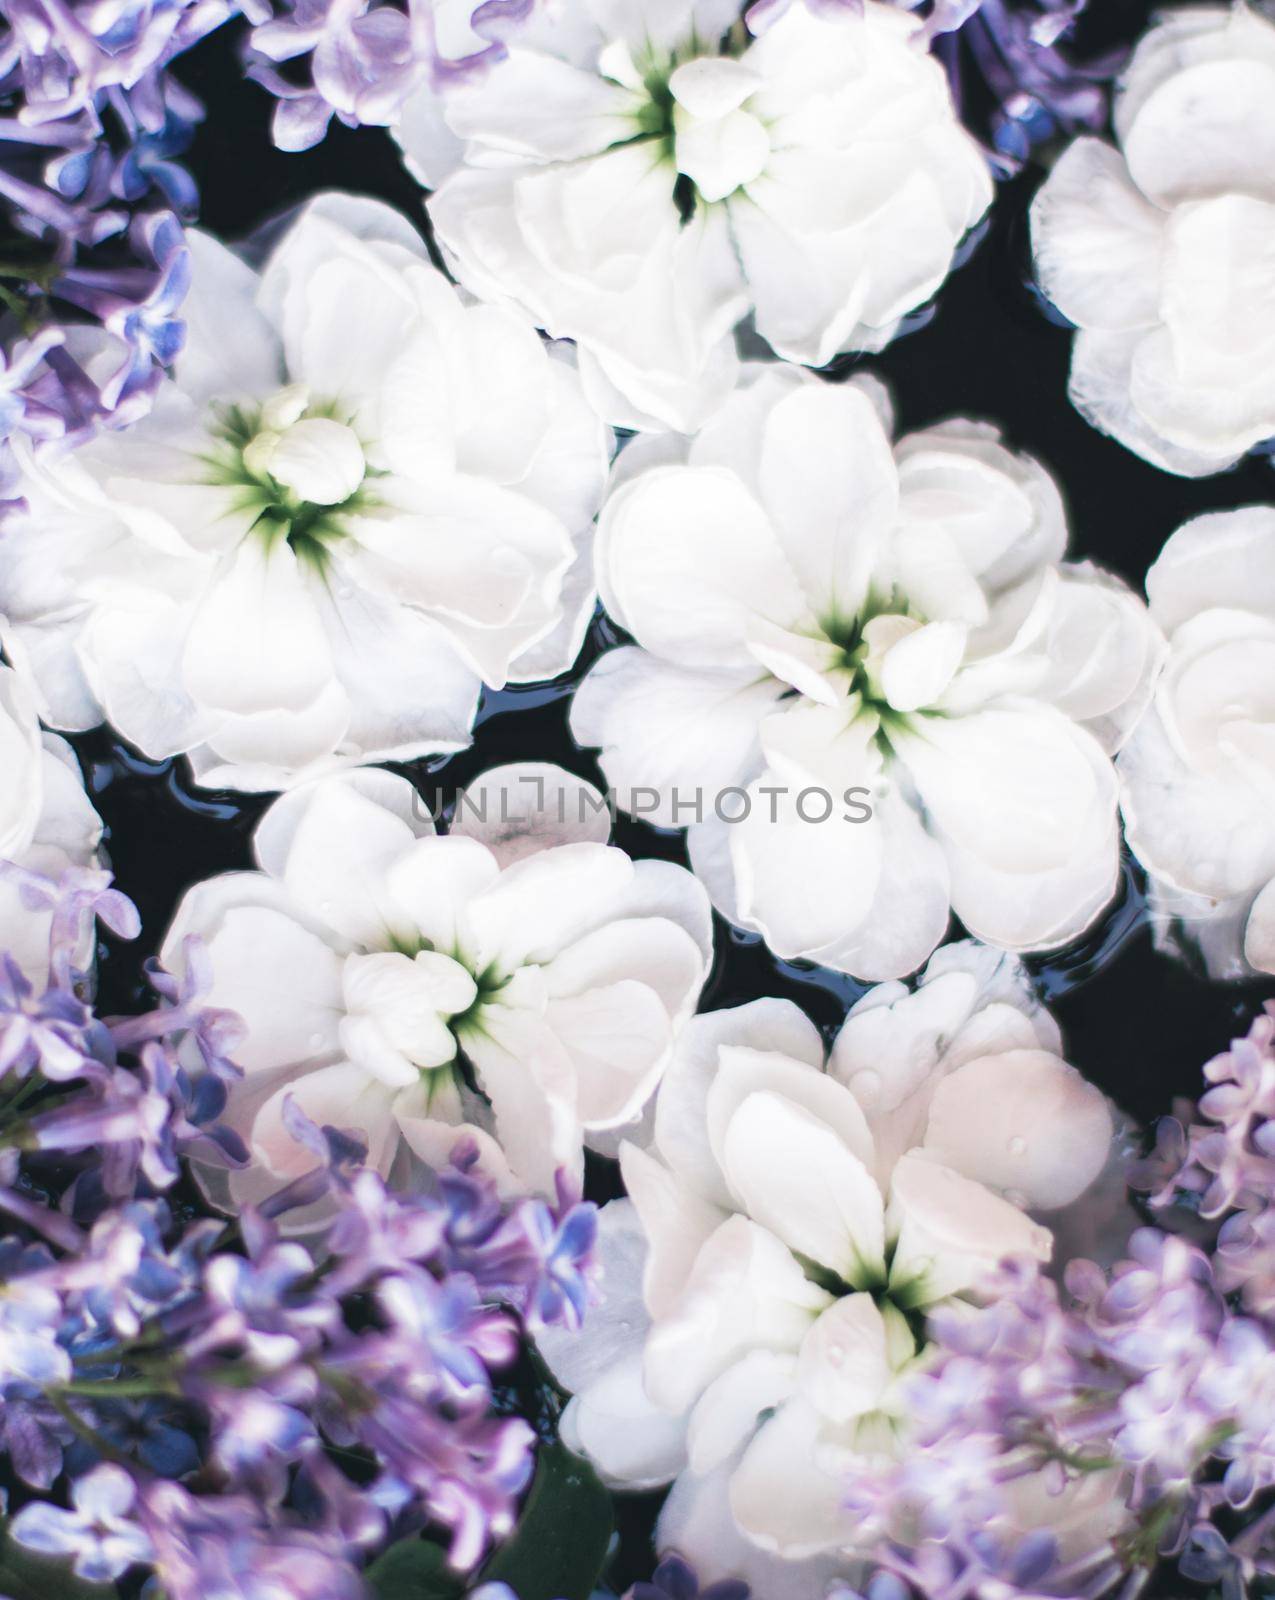 Pretty flowers in springtime - botanical backgrounds, spring and summer nature and dream garden concept. Floral beauty in bloom